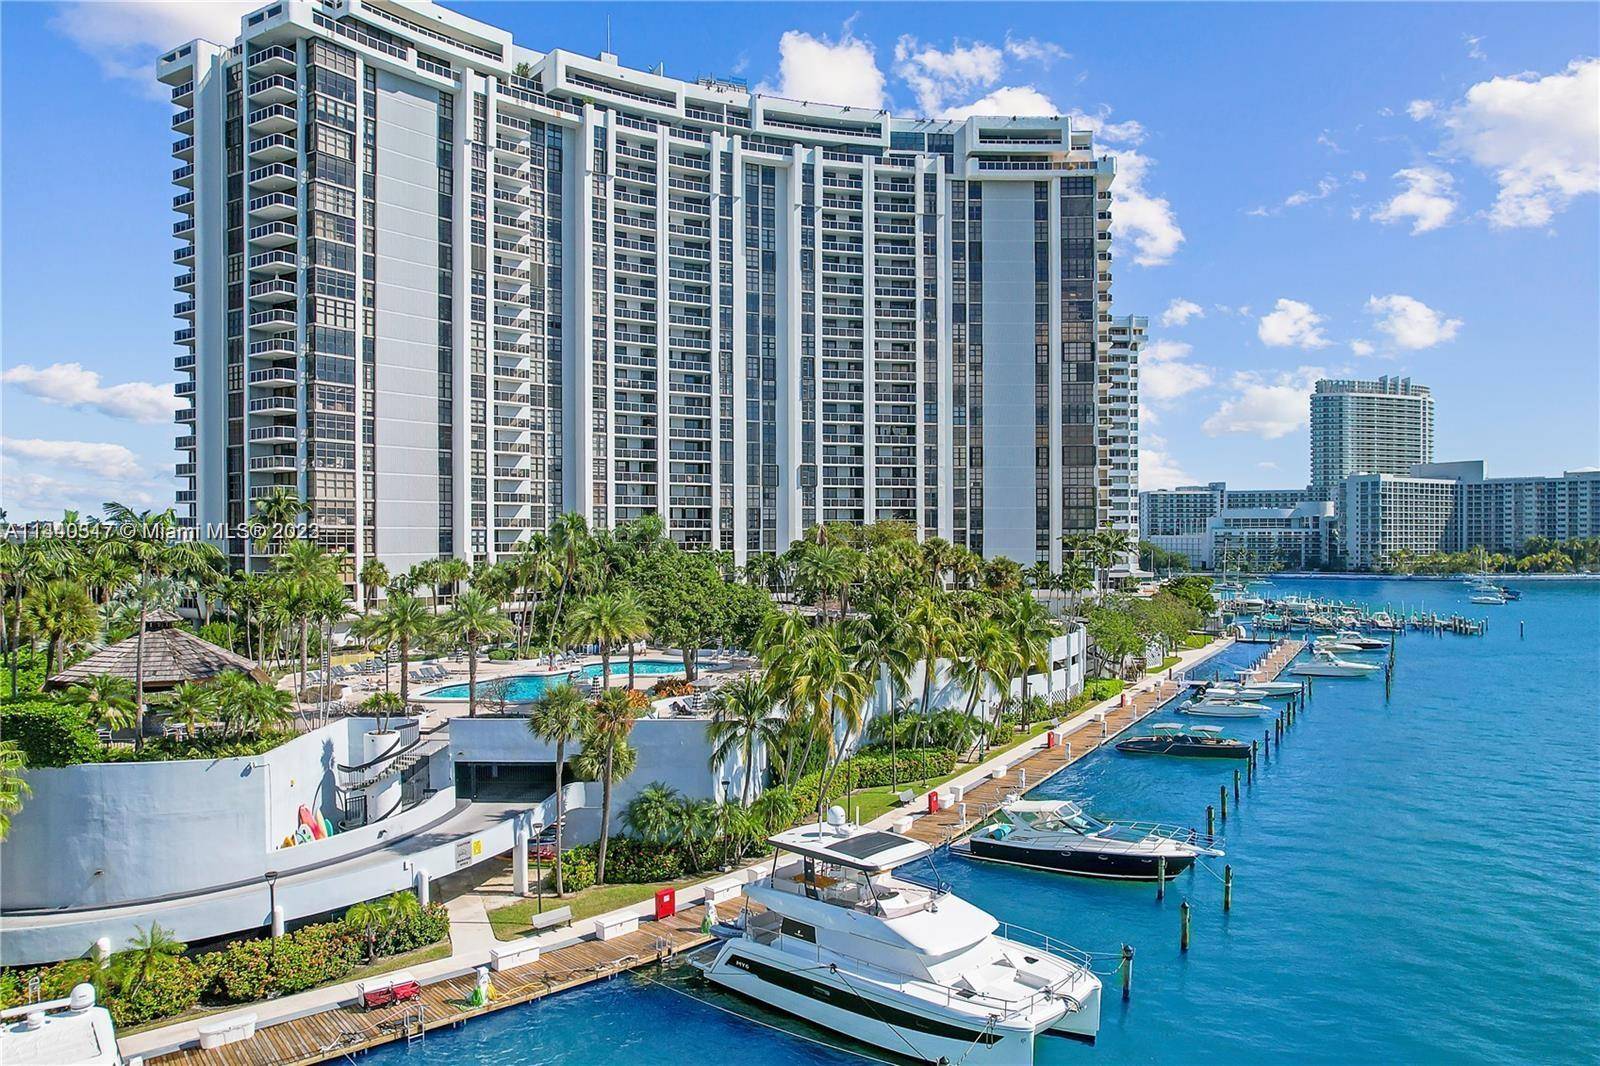 Stunning views of the Bay and Miami Skyline from this gorgeous 2 bed 3 bath Den in the ever popular, full service, luxury Nine Island on the Venetian Islands.